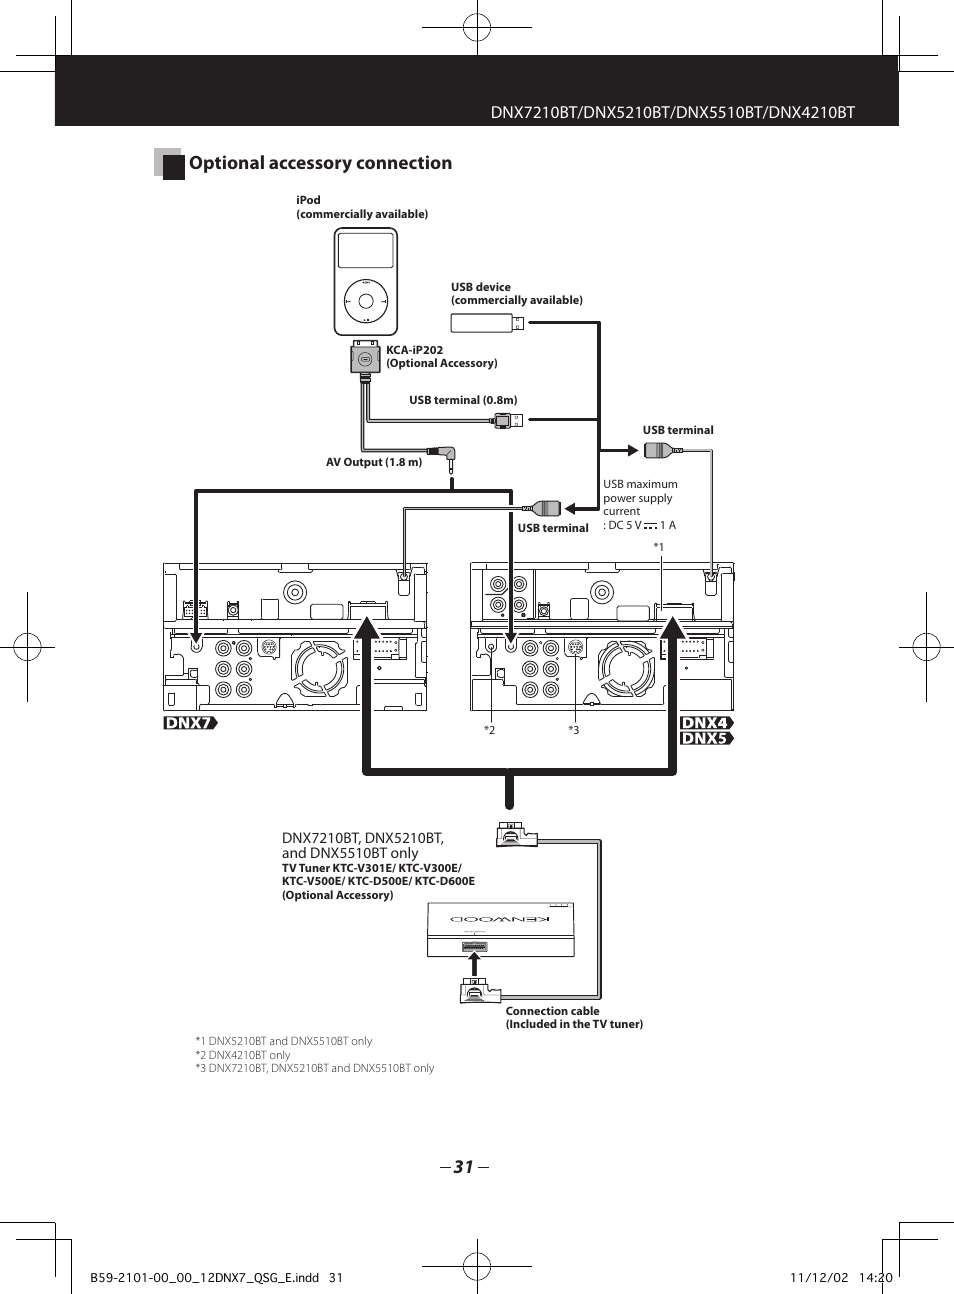 Optional accessory connection | Kenwood DNX5210BT User Manual | Page 31 /  36 | Original mode